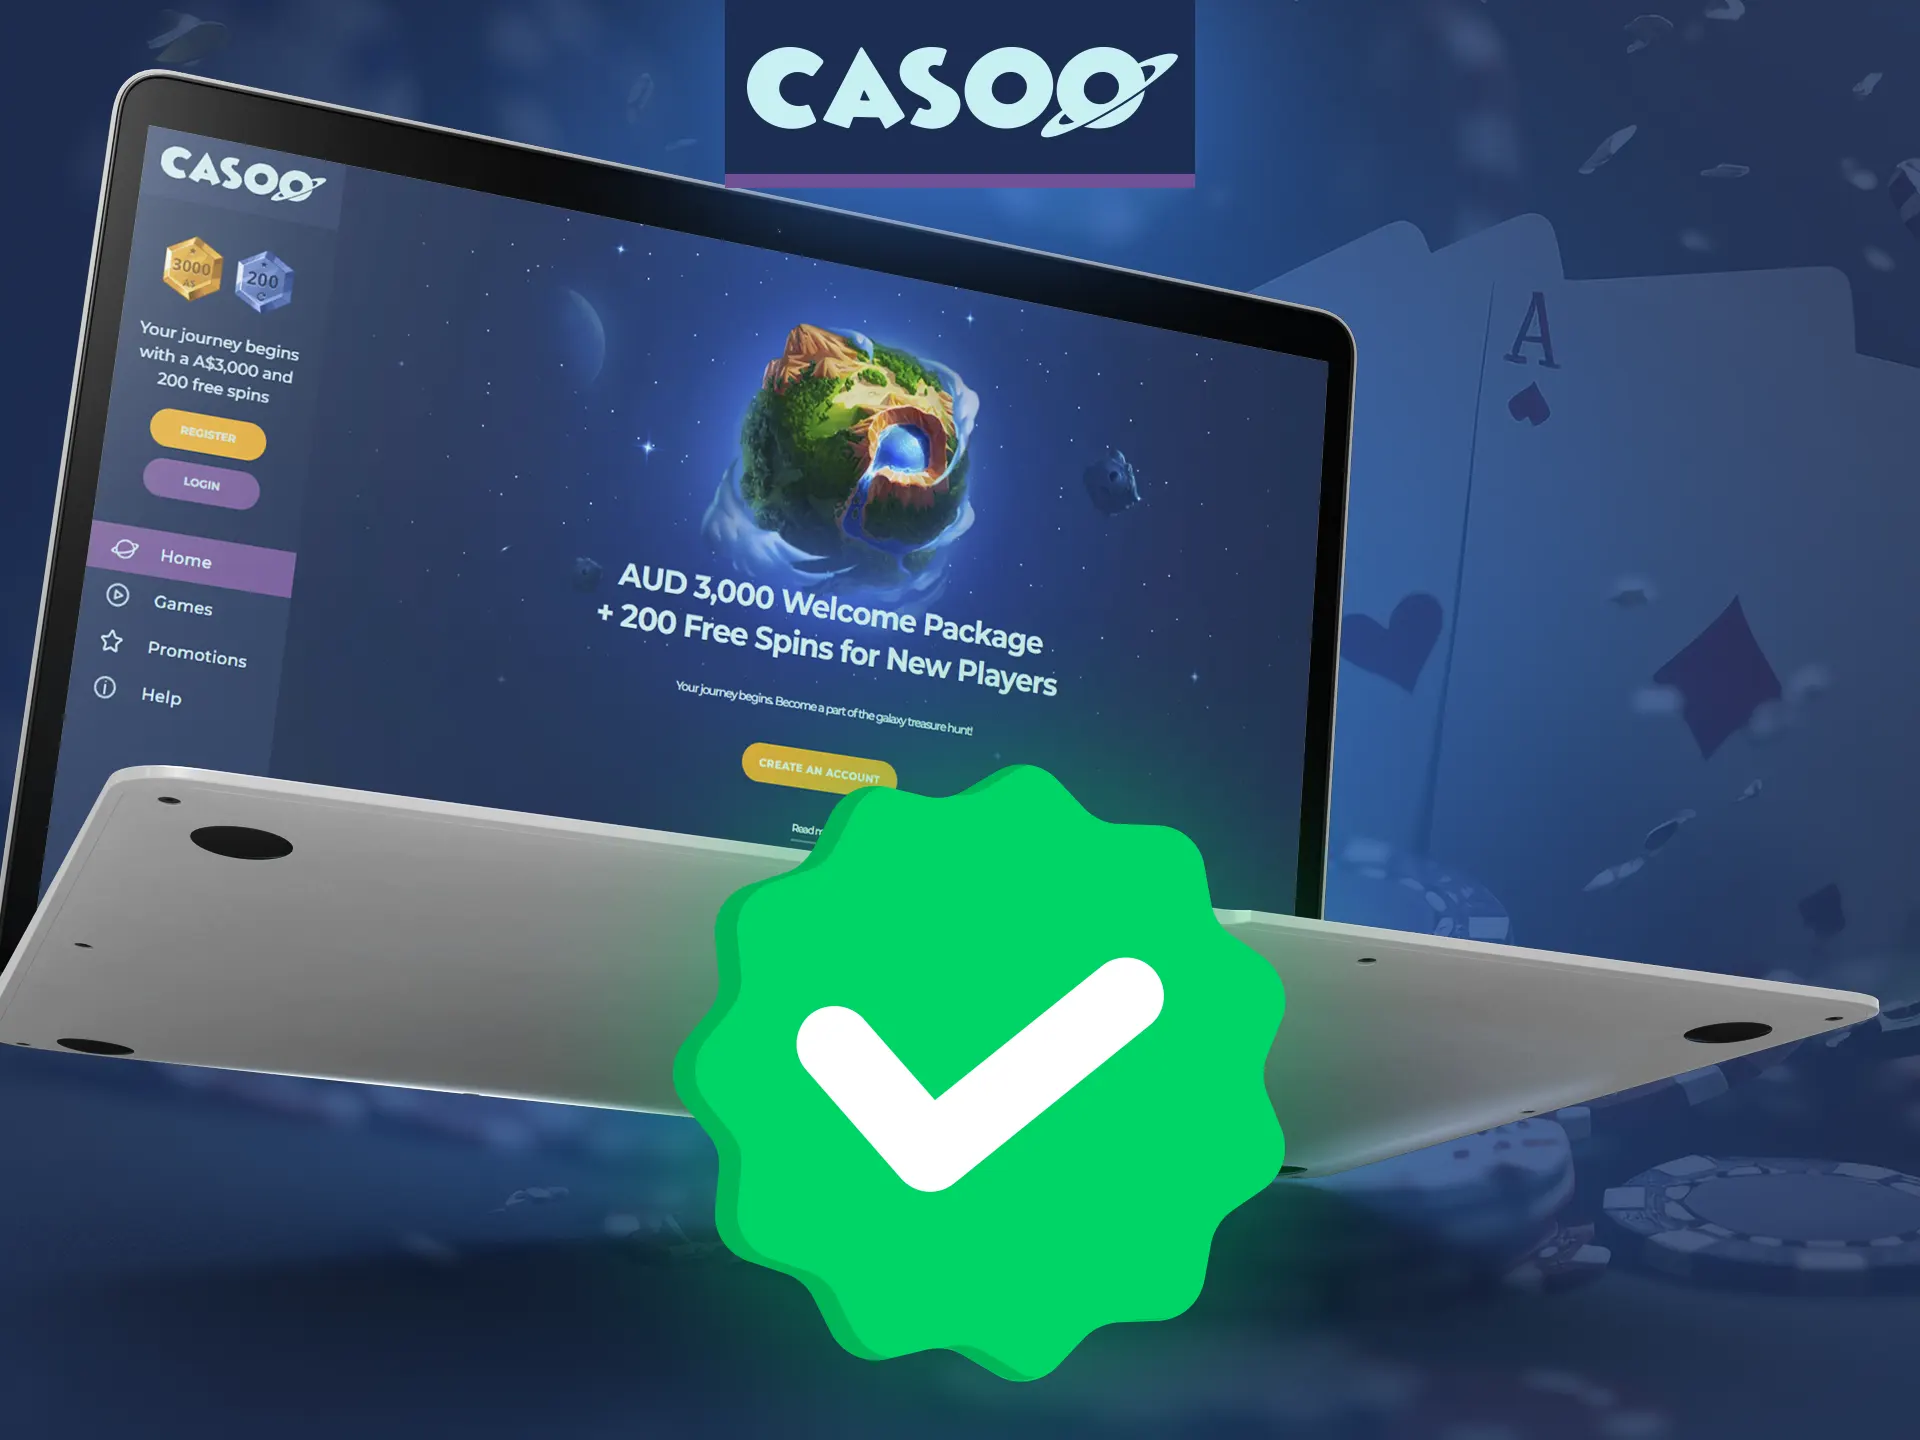 Learn the verification process at Casoo casino.